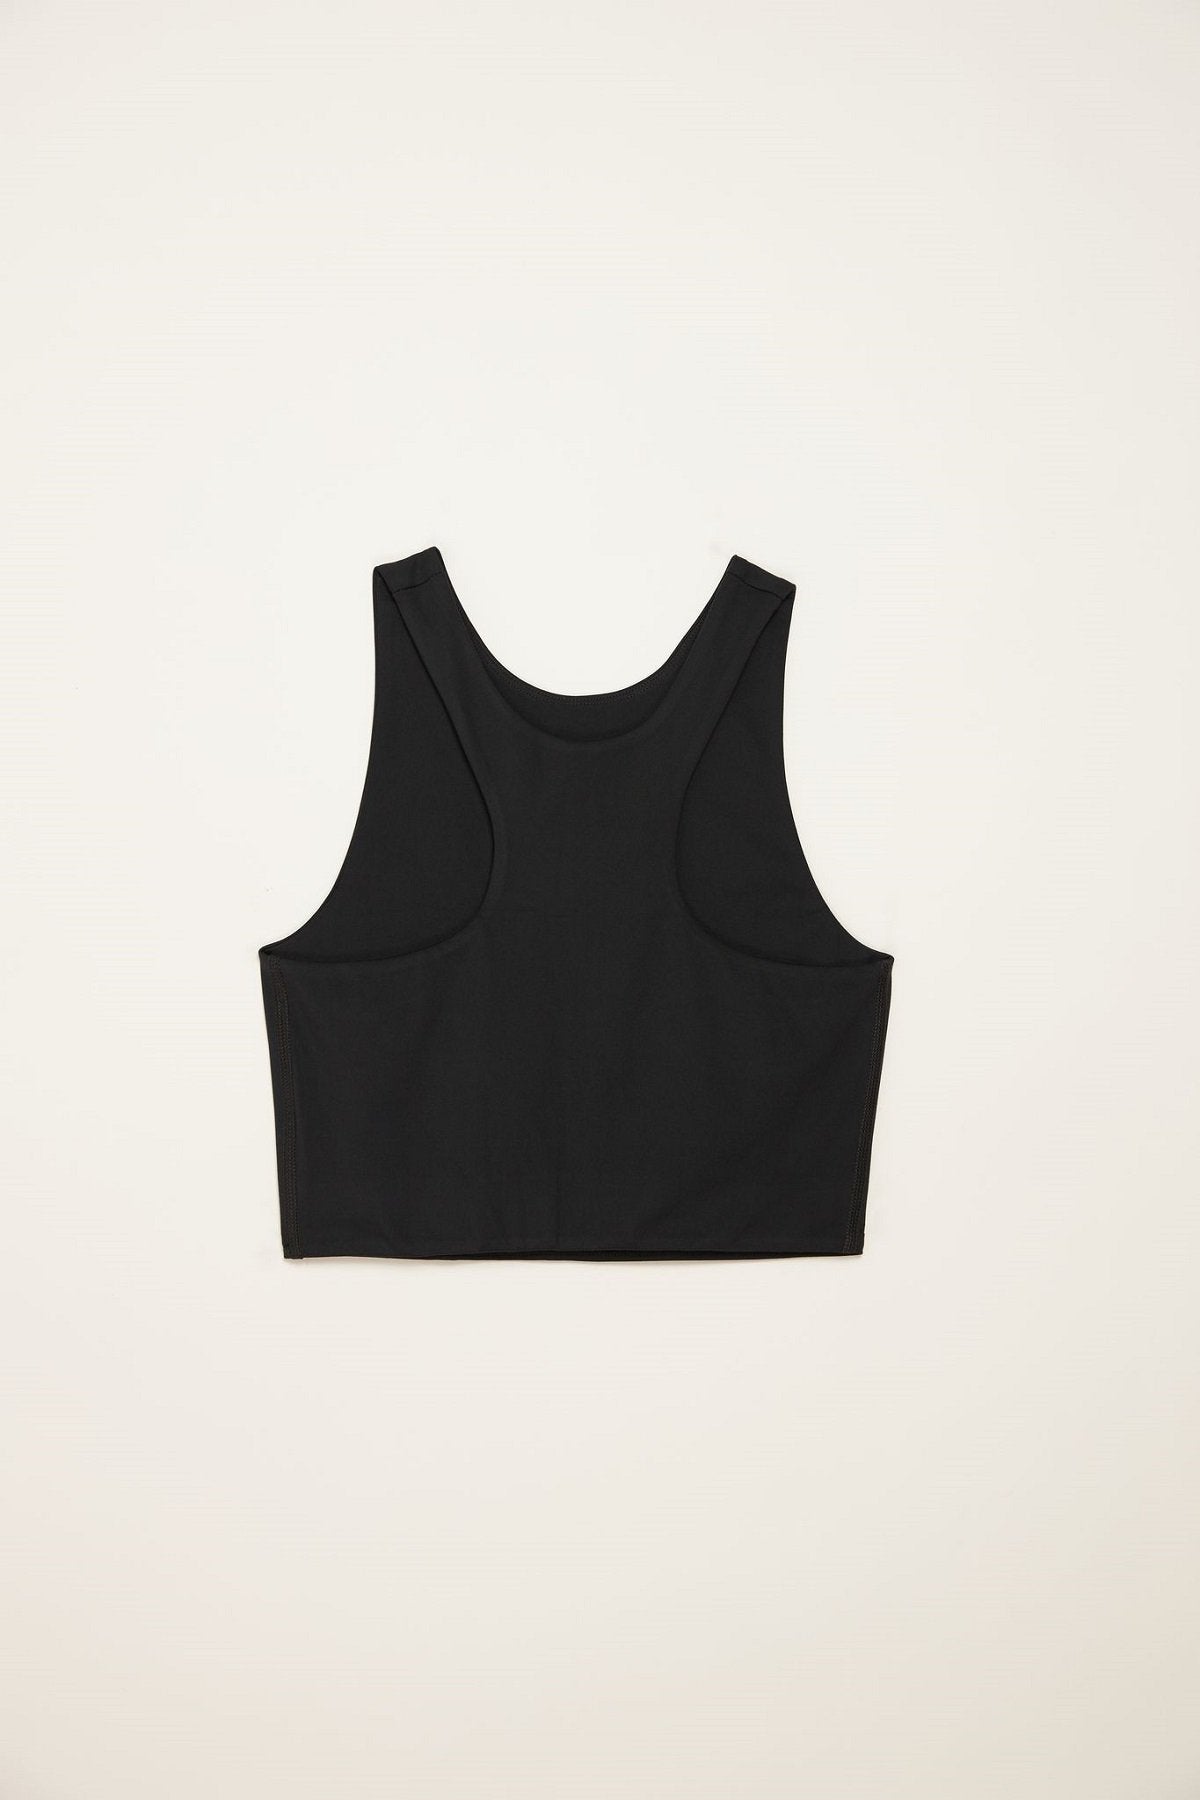 Girlfriend Collective Dylan Crop Tank Bra - Made from Recycled Plastic Bottles Black Underwear